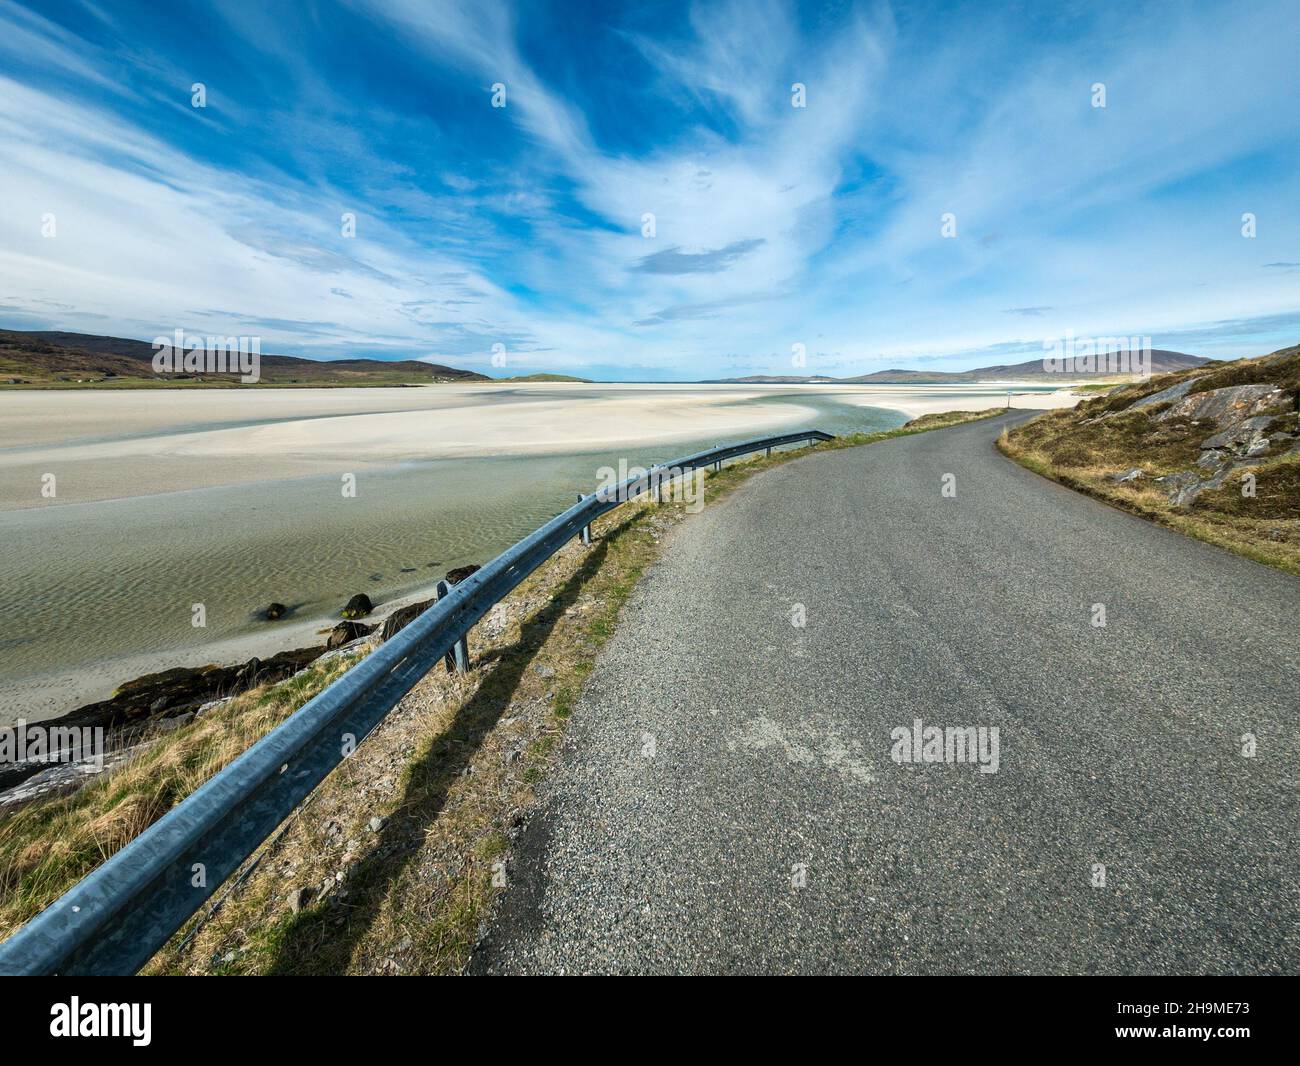 Road and Armco barrier by the beautiful Luskentyre beach (Traigh Losgaintir) on the remote Isle of Harris in the Outer Hebrides, Scotland, UK Stock Photo